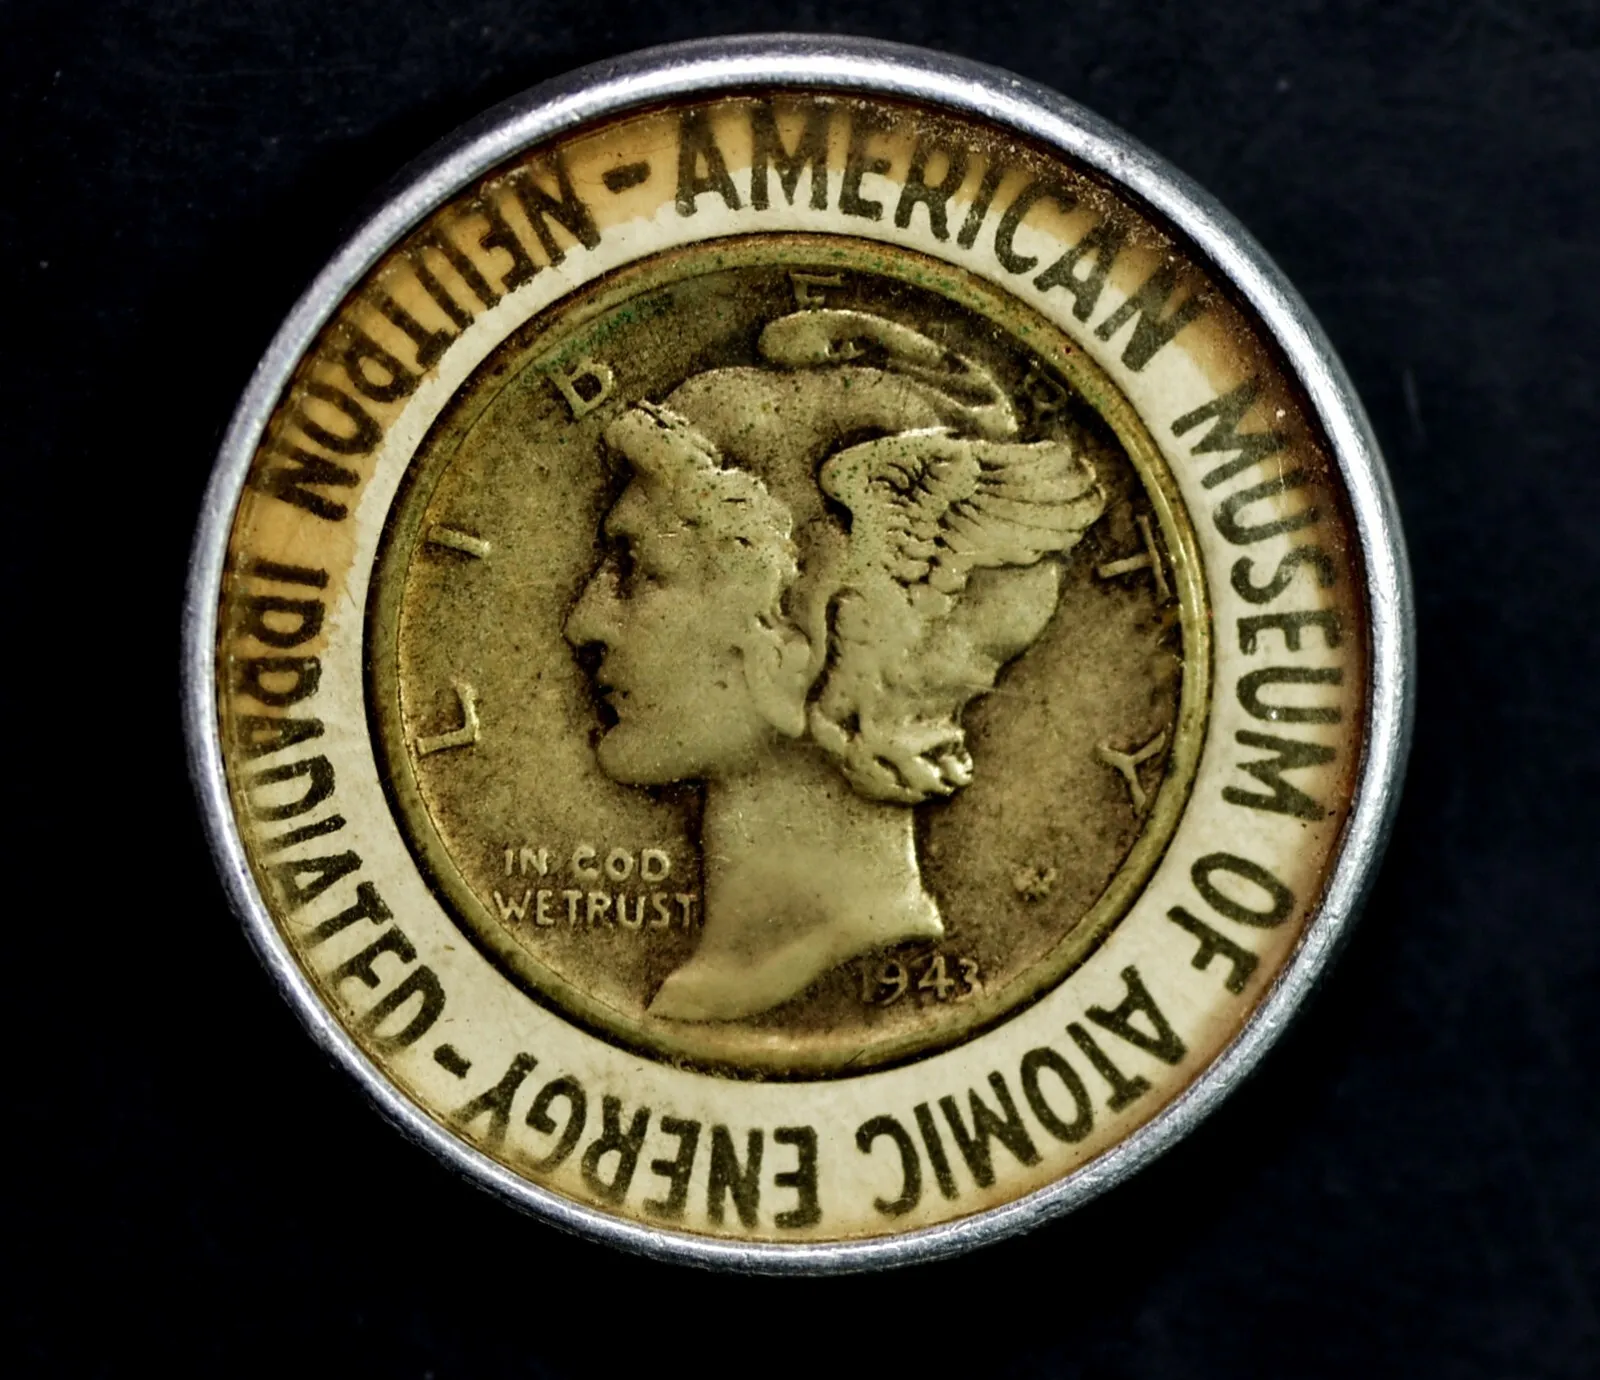 American Museum Of Atomic Energy Neutron Irradiated 1943 Silver Dime